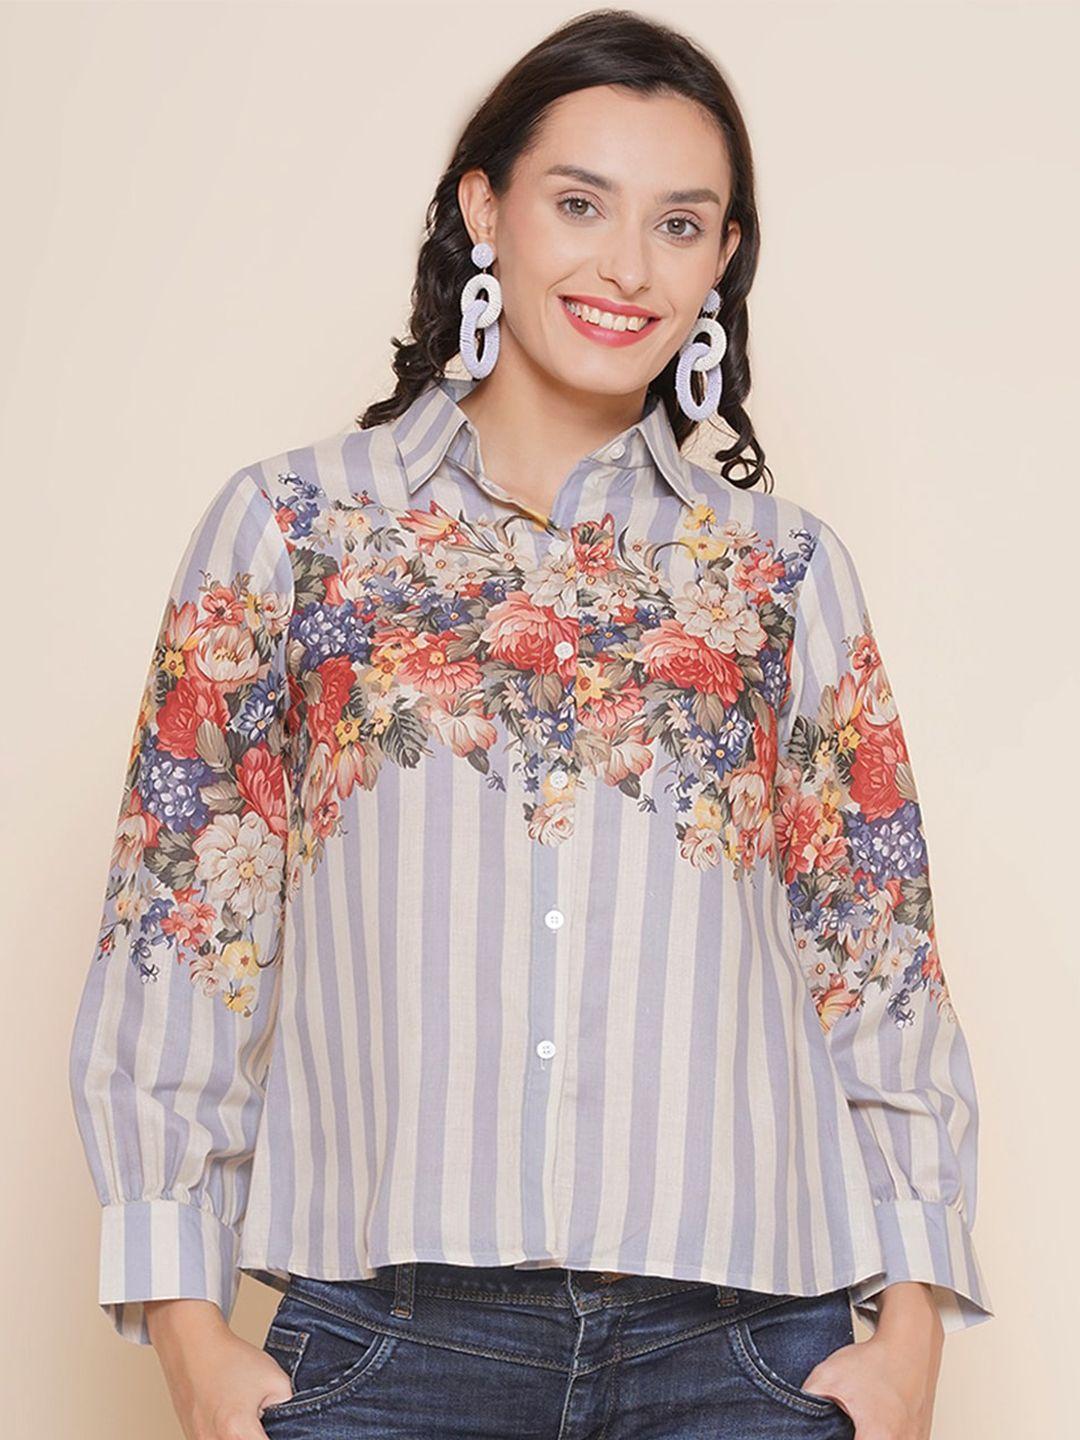 bhama-couture-floral-printed-cotton-shirt-style-top